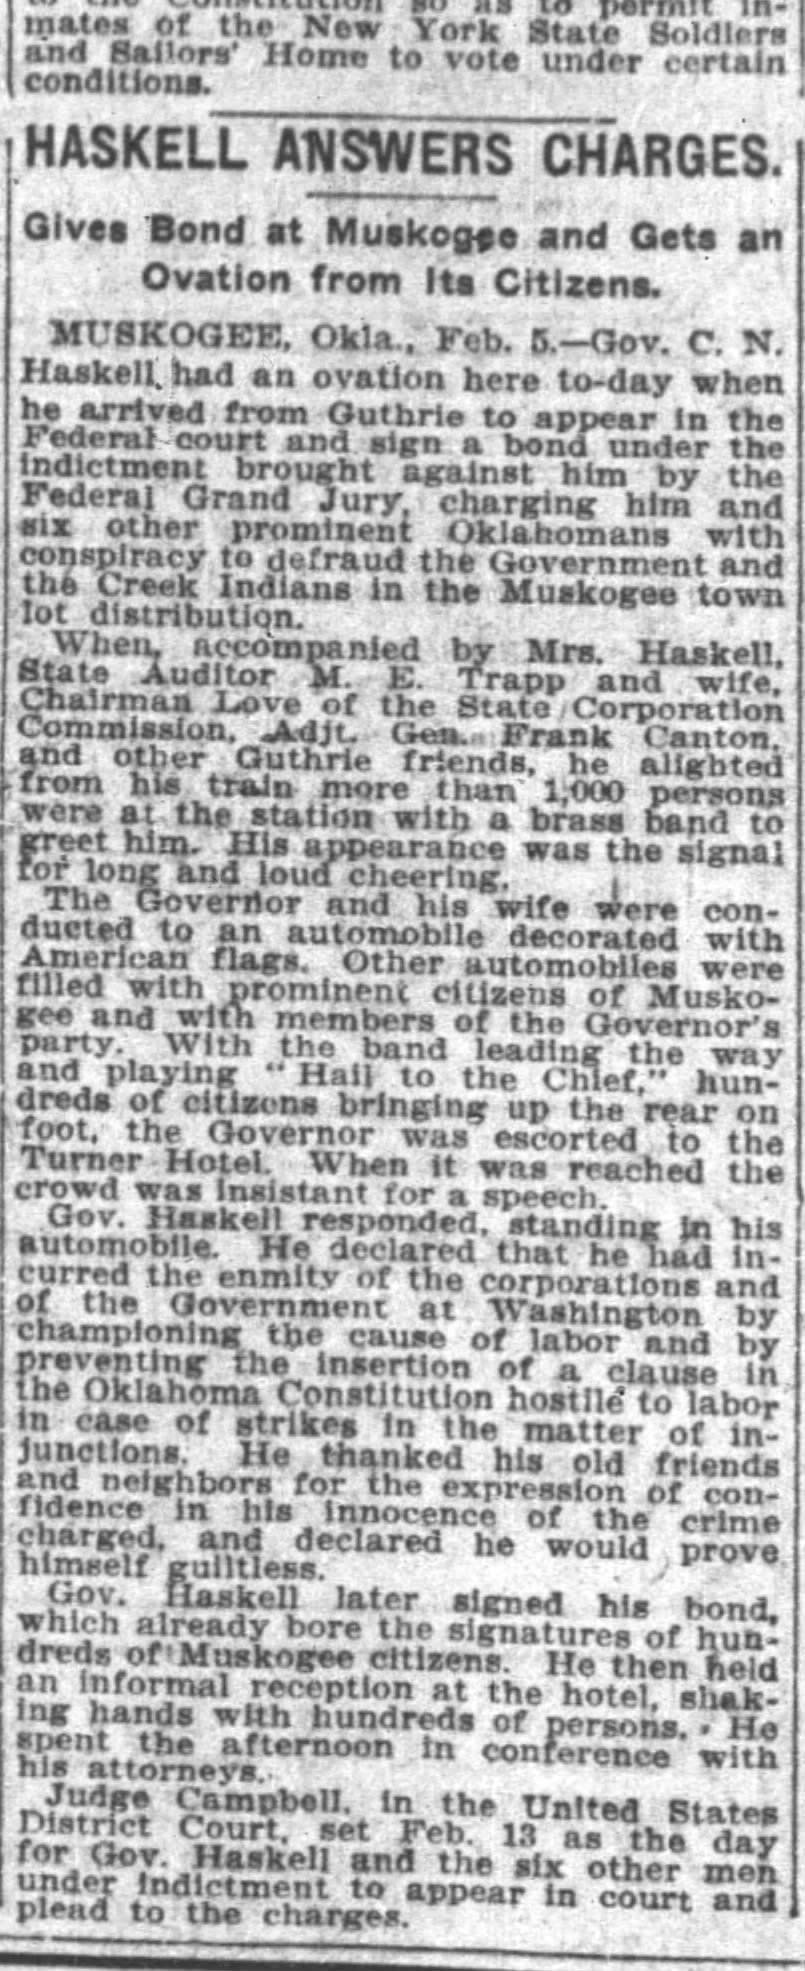 Governor Haskell Answers Charges, The New York Times, Feb 6, 1909, Muskogee, OK